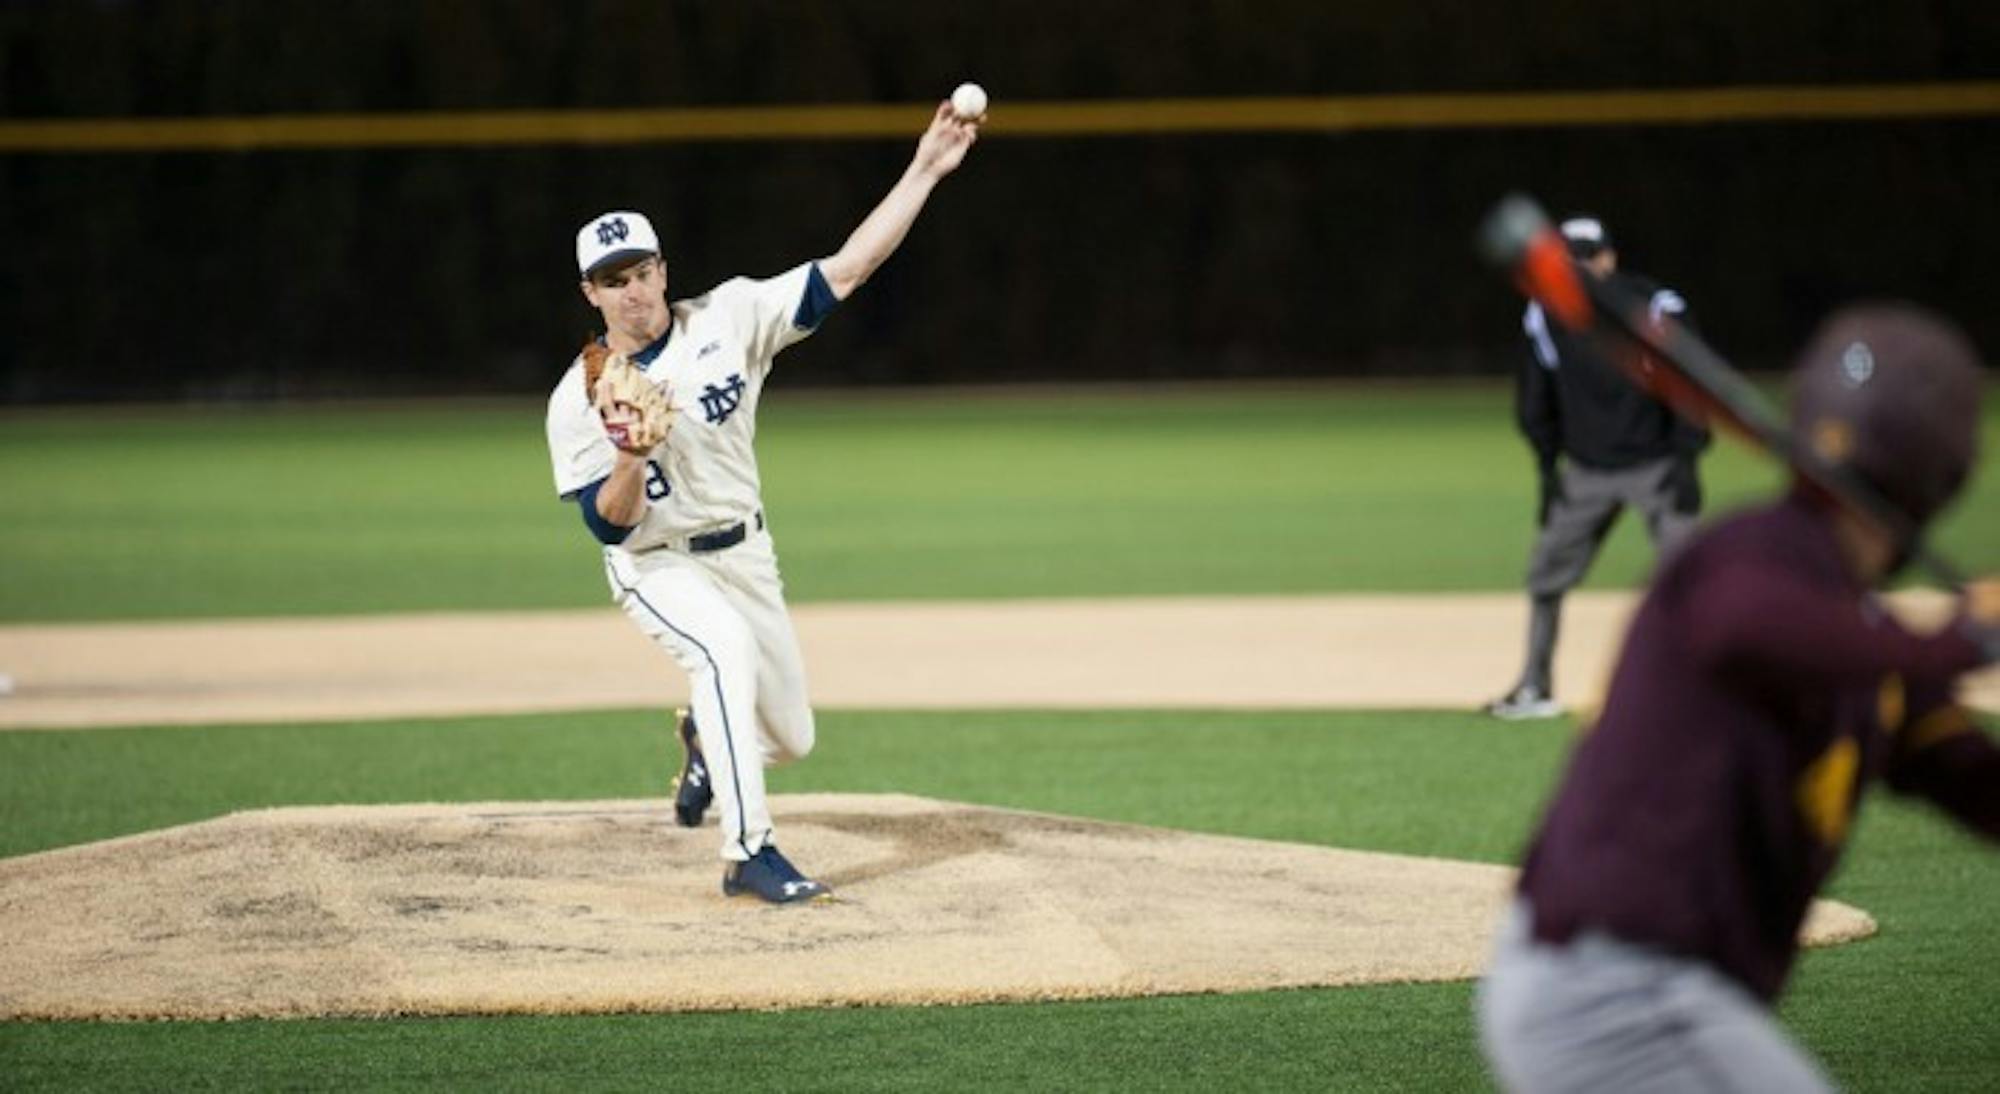 Irish junior left-hander Scott Tully delivers a pitch during Notre Dame’s 8-3 win over Central Michigan on March 18 at Frank Eck Stadium. Tully led the team with 63 strikeouts over 65 1/3 innings as he started five games and compiled a 4-4 record and 3.17 earned-run average.